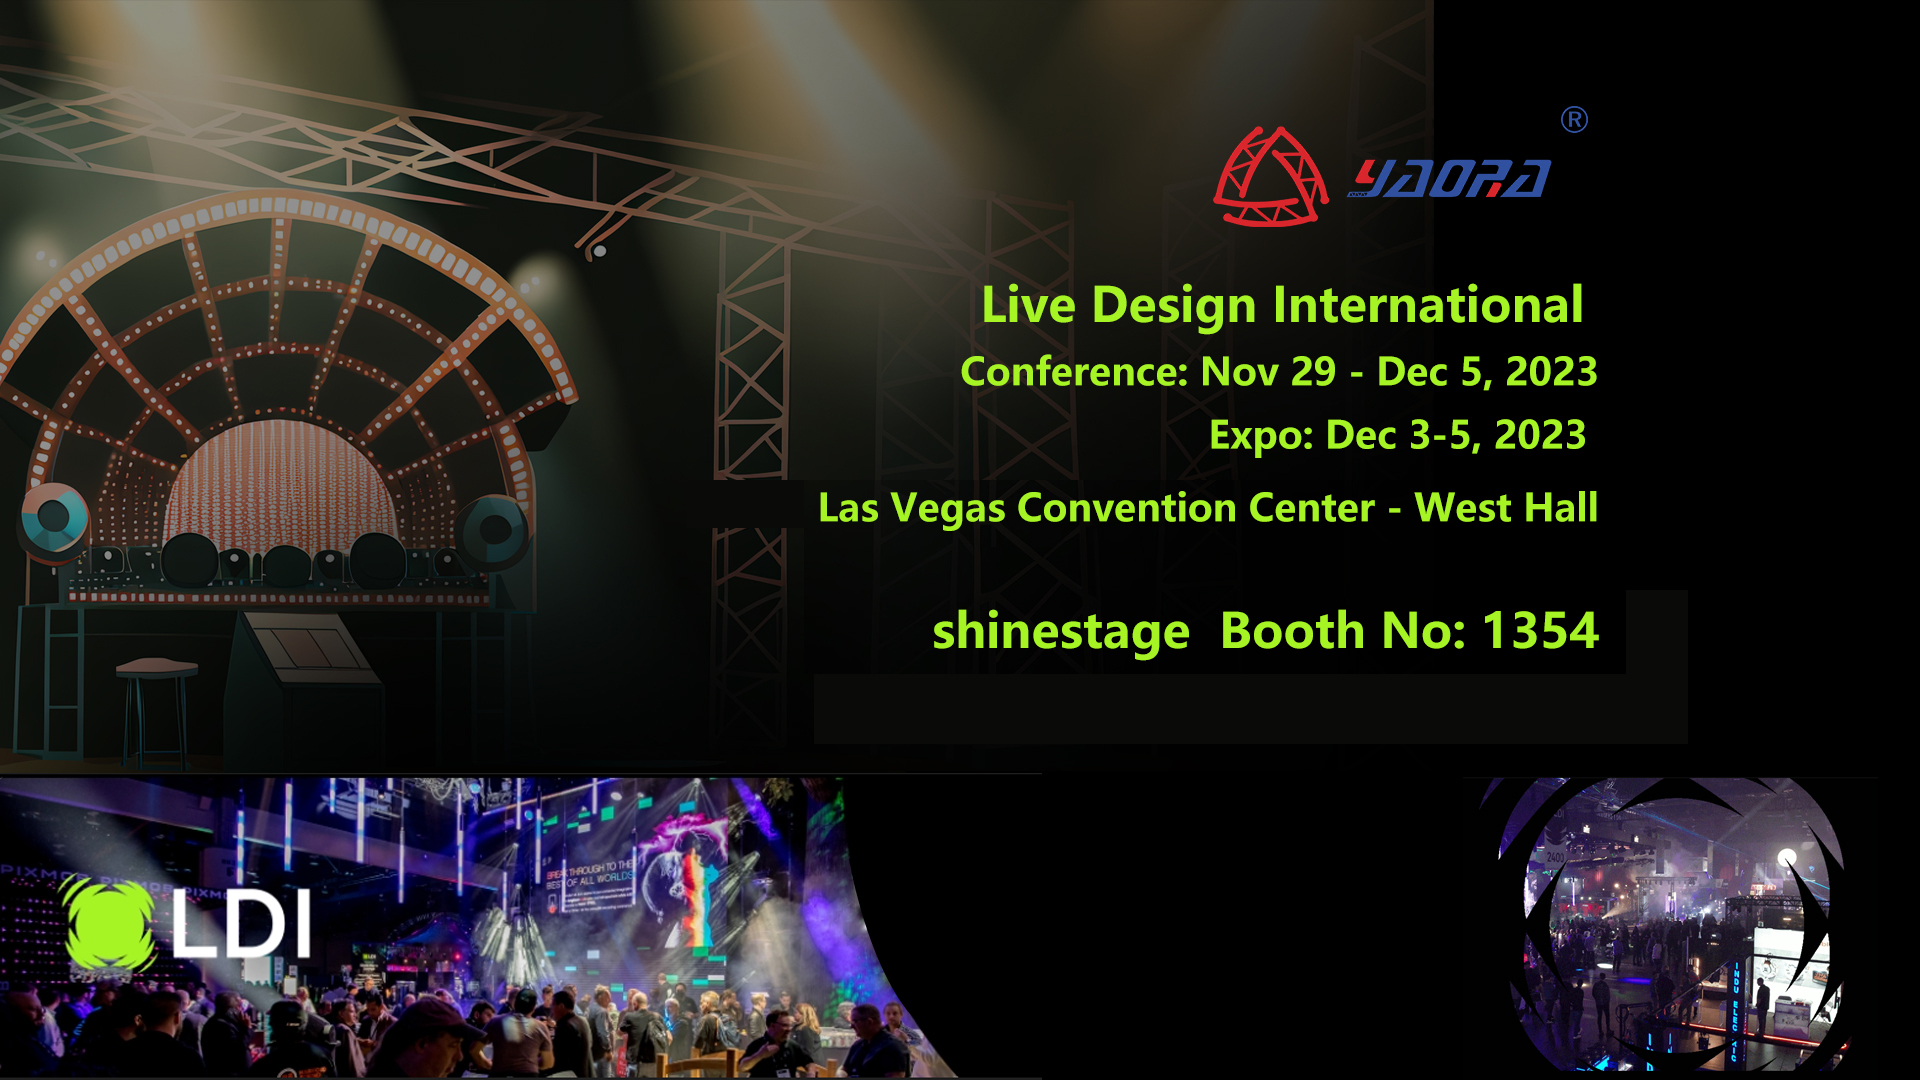 Shinestage invites you to meet at Live Design International 2023